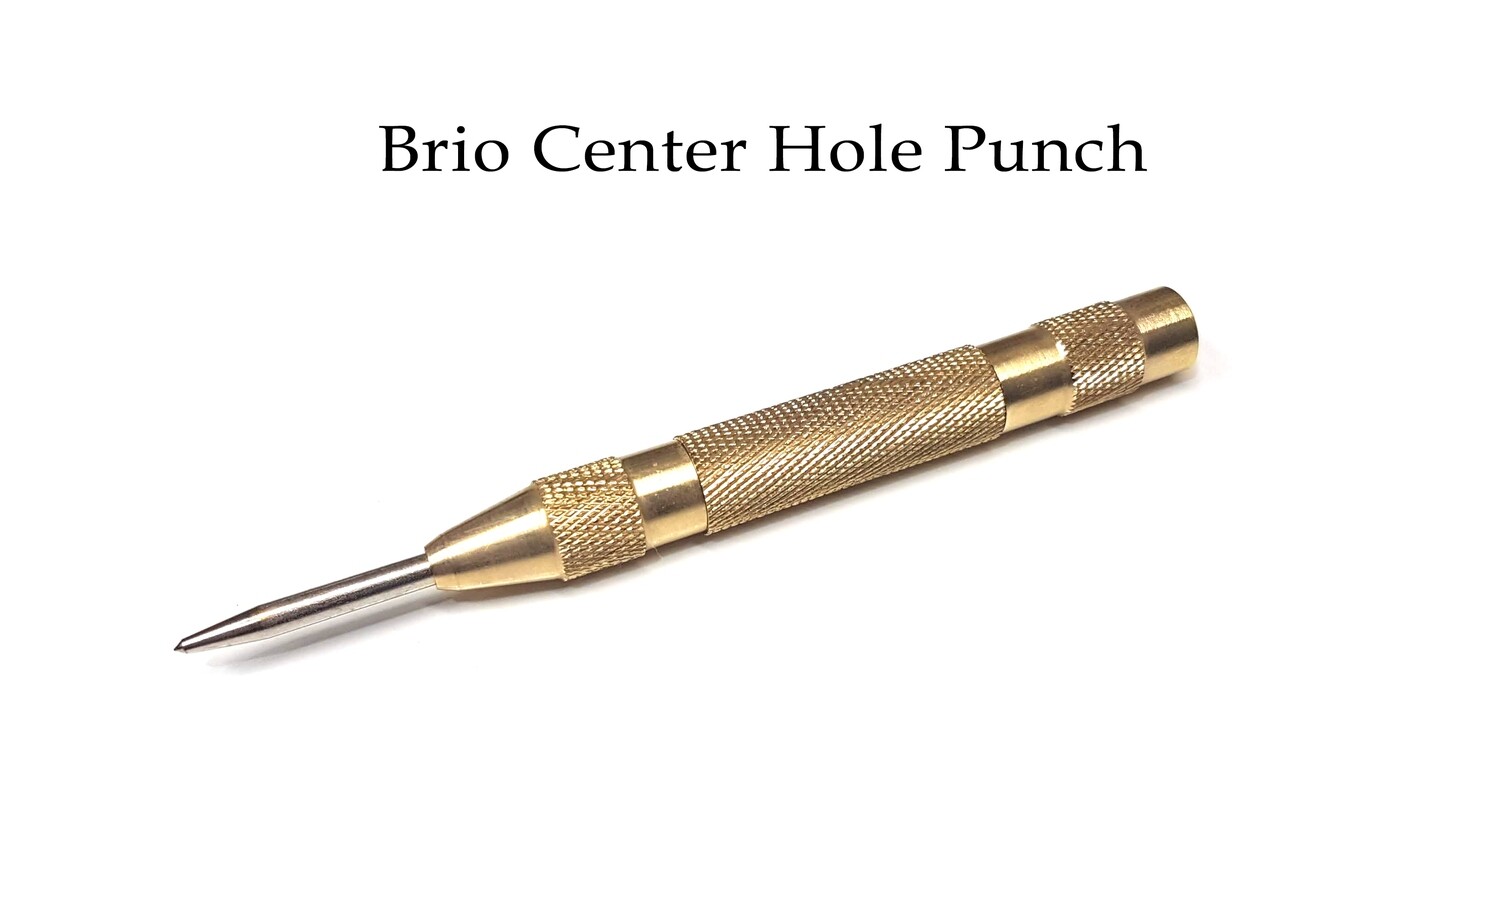 Brio Center Automatic Hole Punch